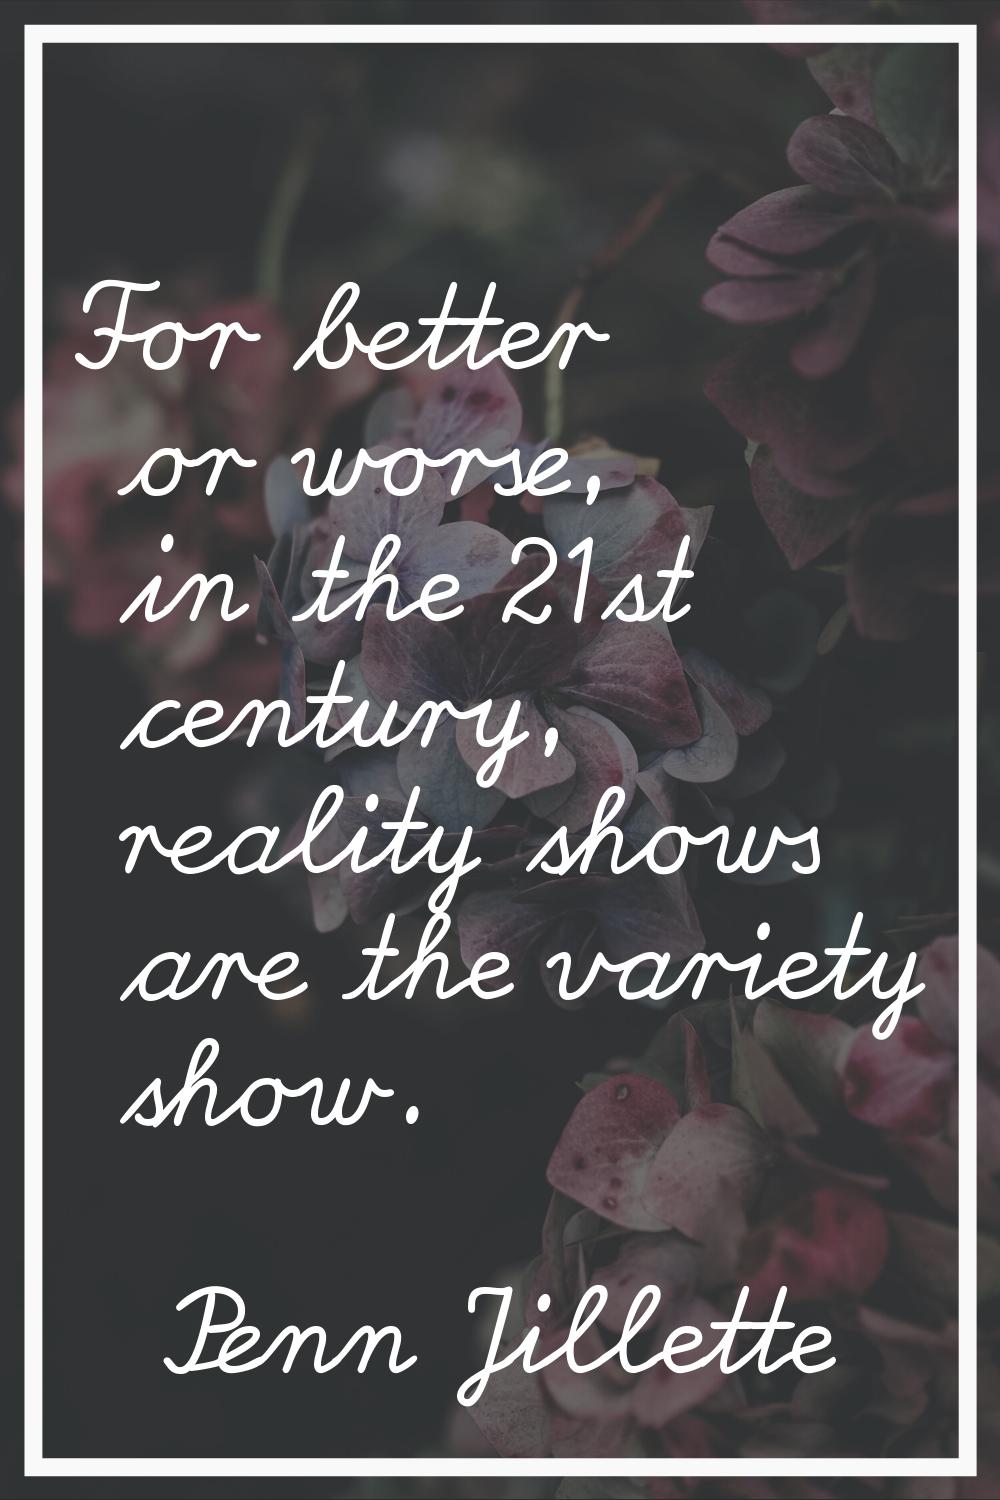 For better or worse, in the 21st century, reality shows are the variety show.